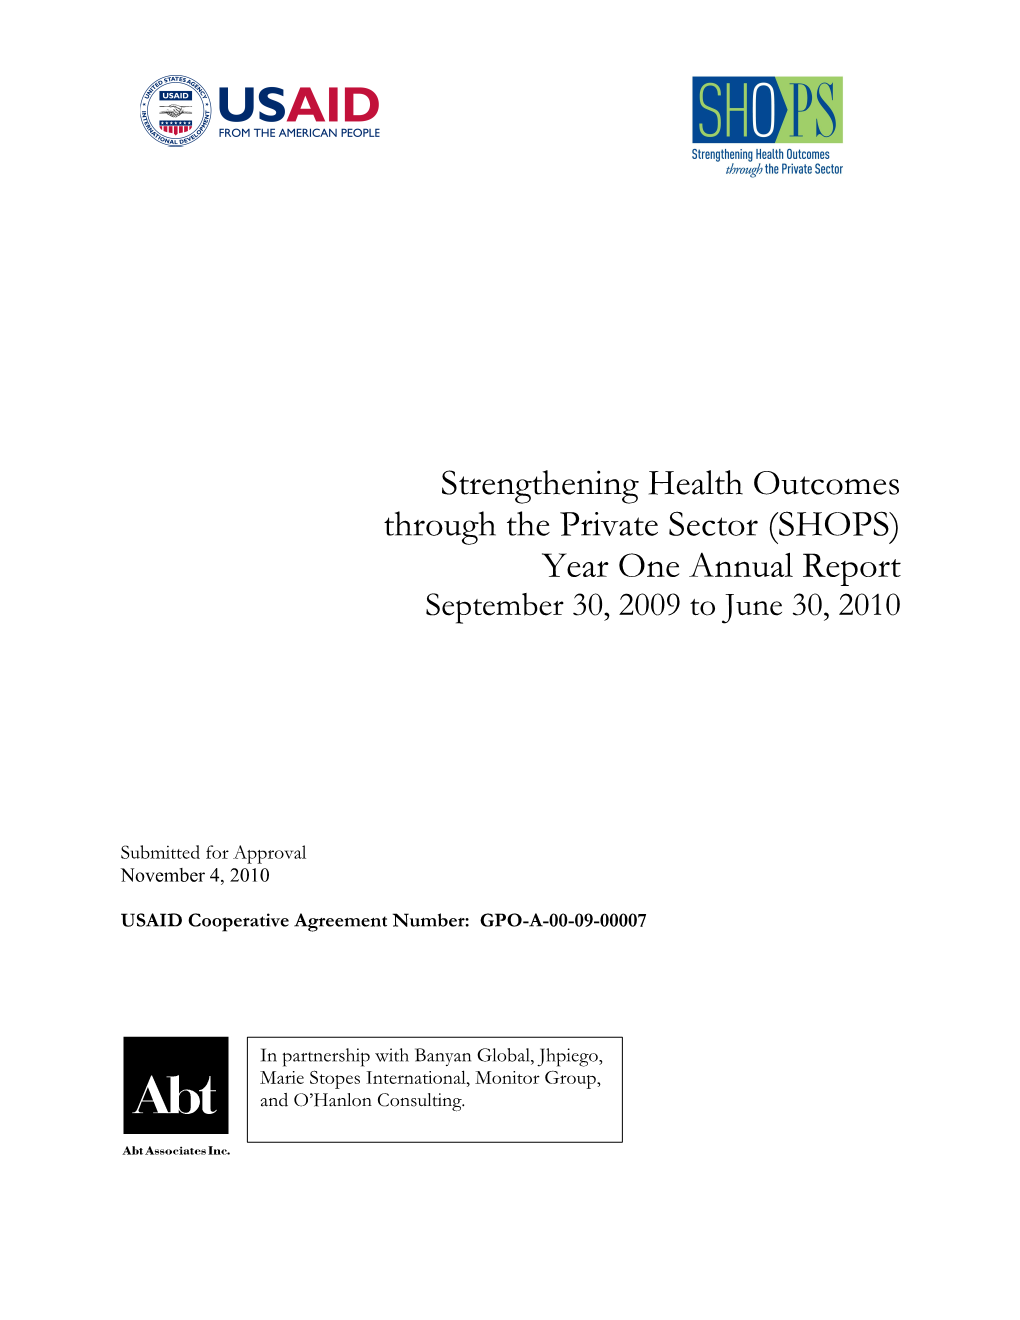 Strengthening Health Outcomes Through the Private Sector (SHOPS) Year One Annual Report September 30, 2009 to June 30, 2010